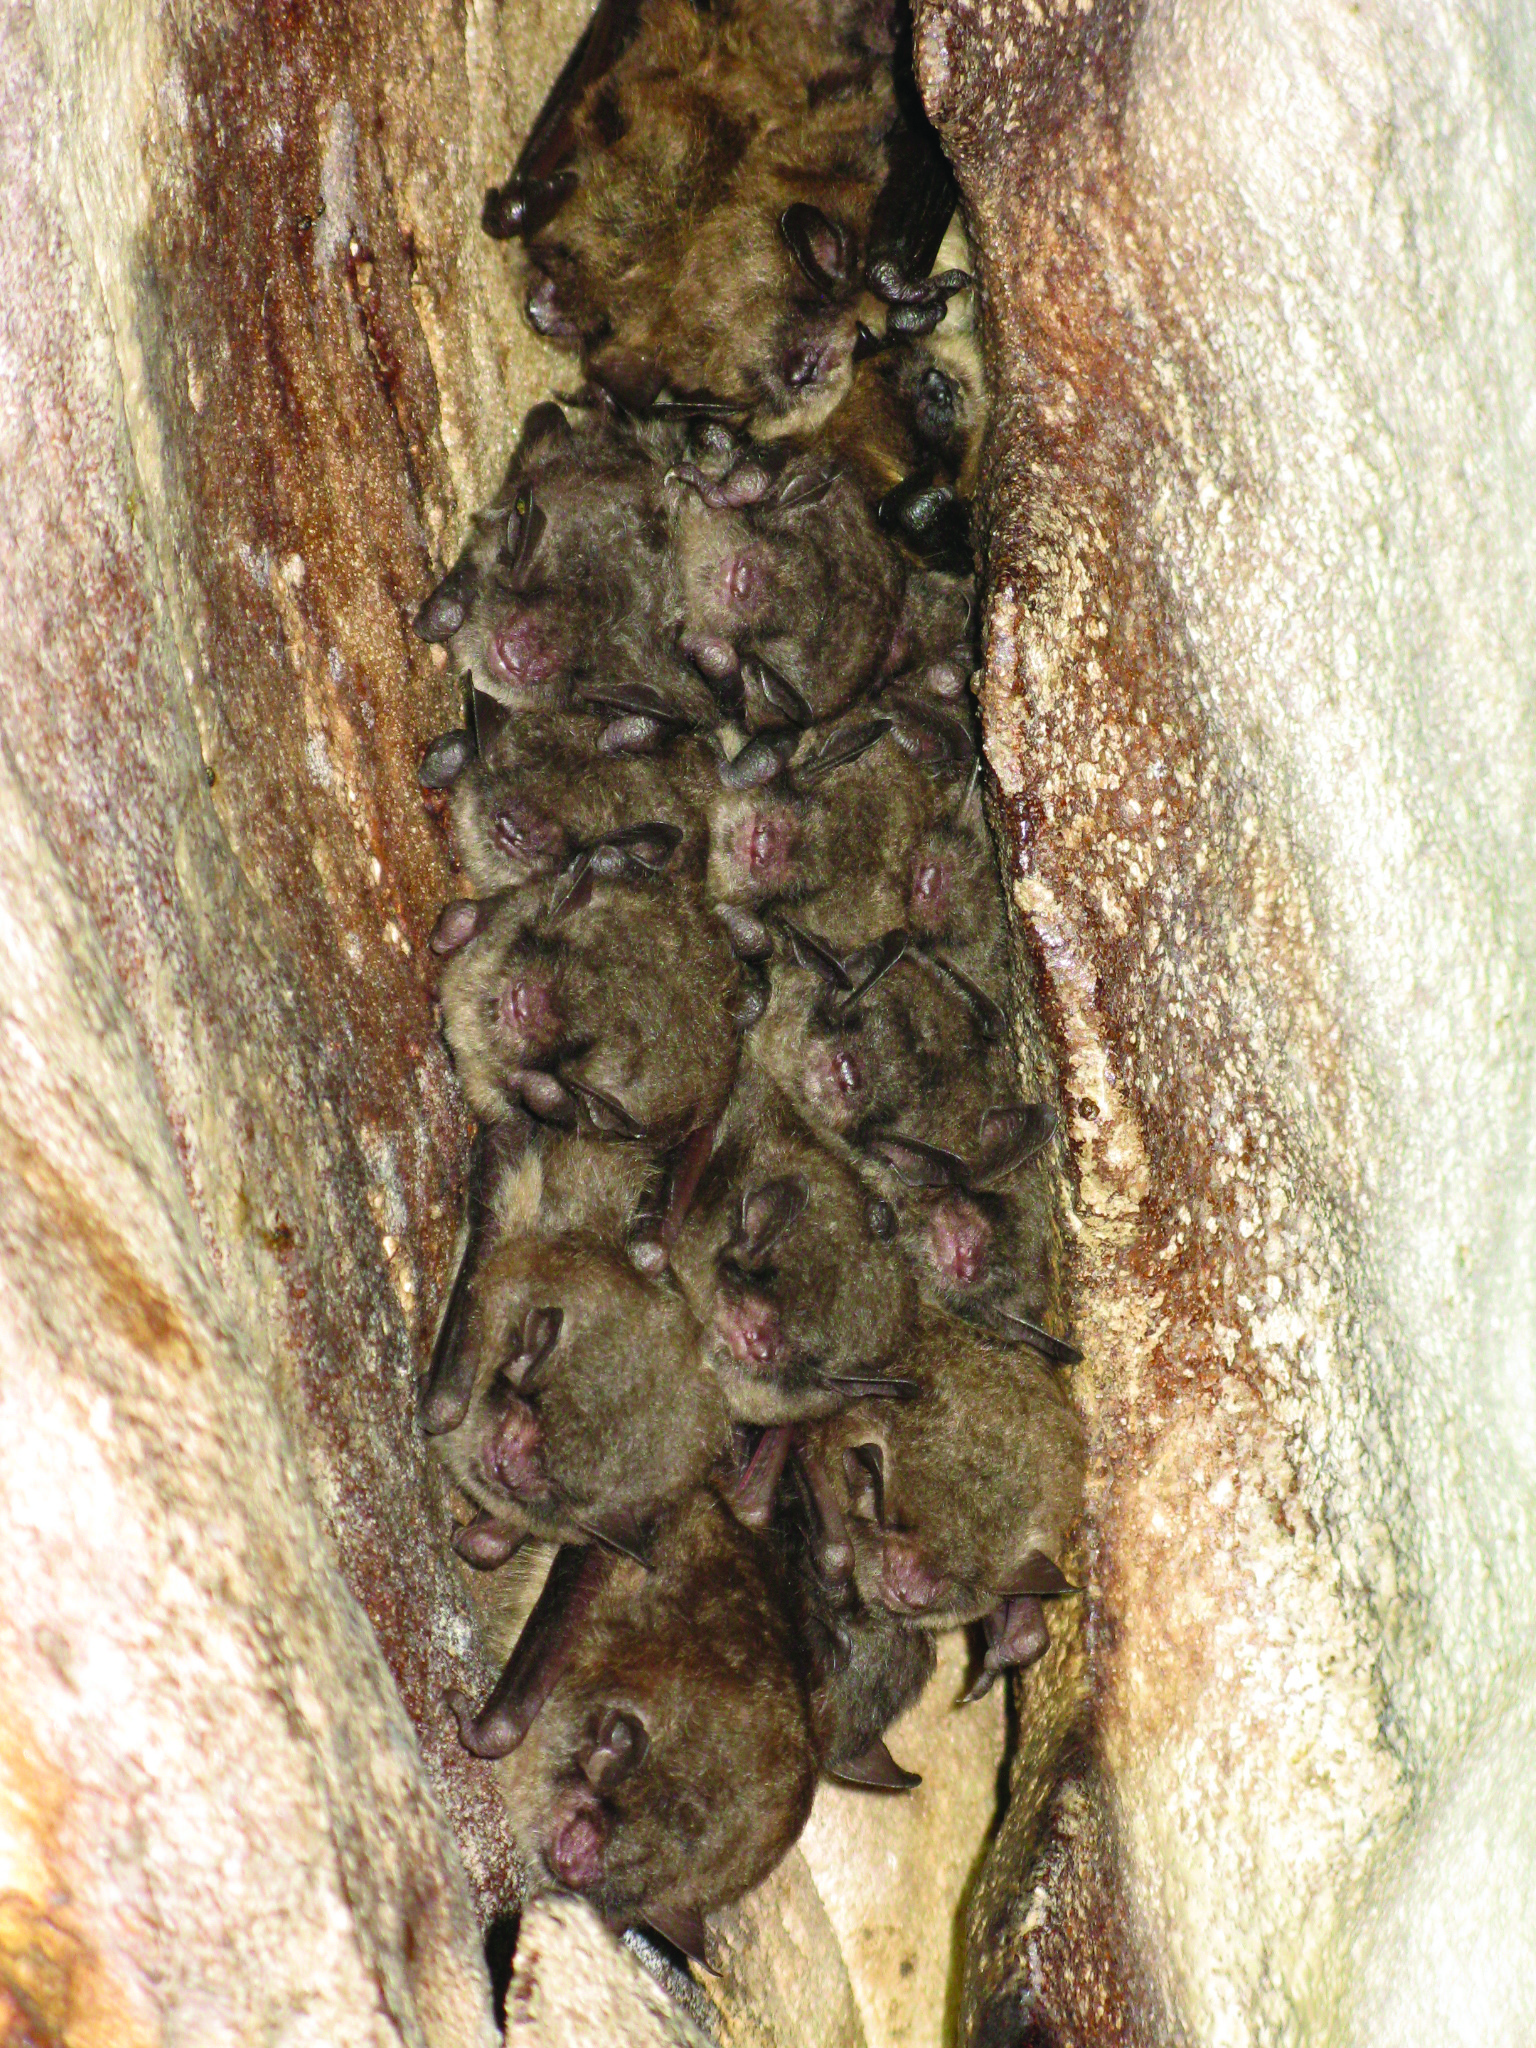 New data confirms national significance of endangered bat colony in Hinesburg